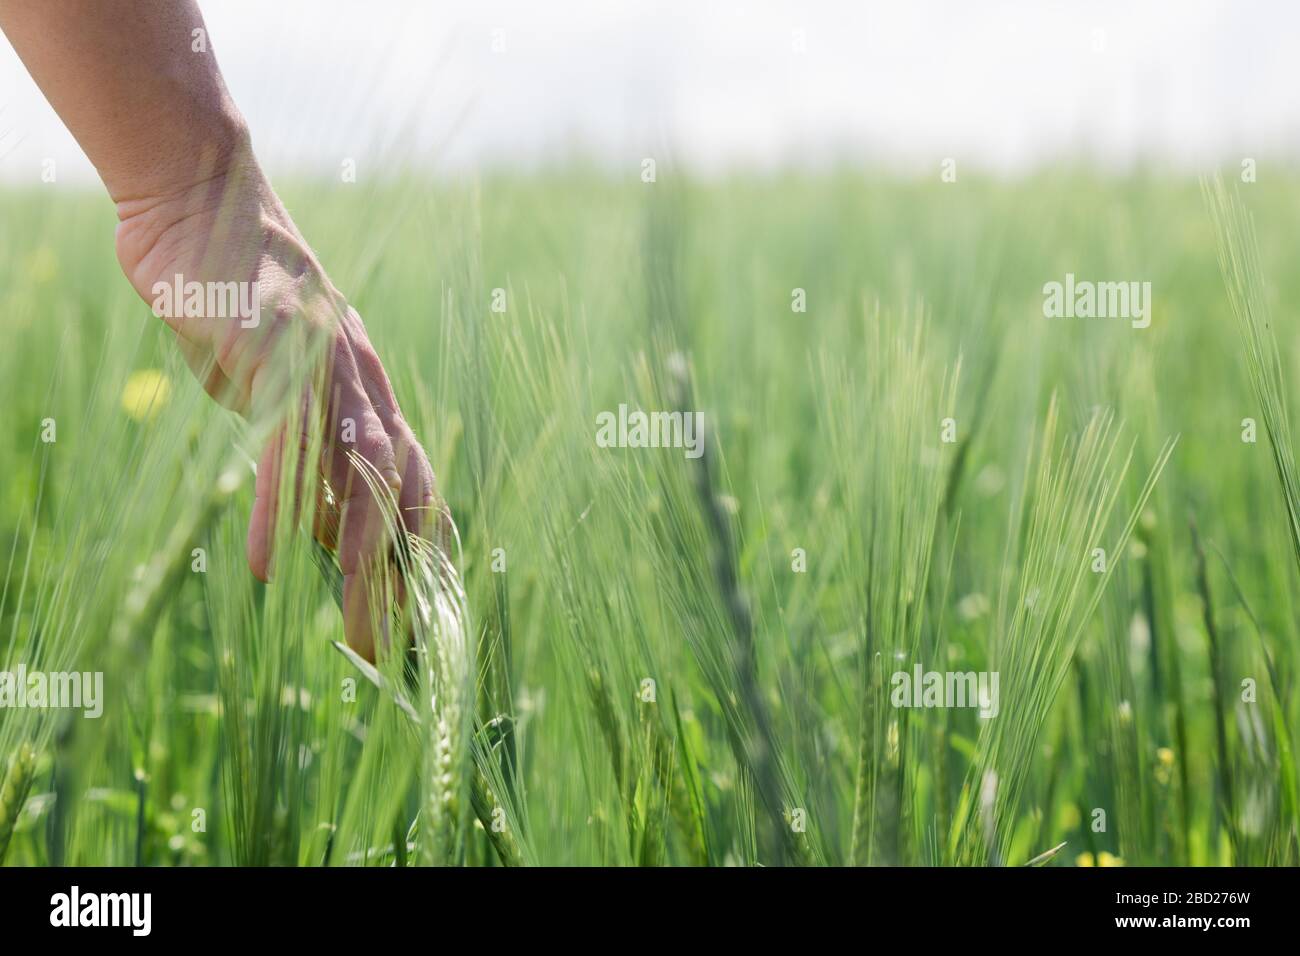 Close-up of a hand touching tall grass in the field Stock Photo